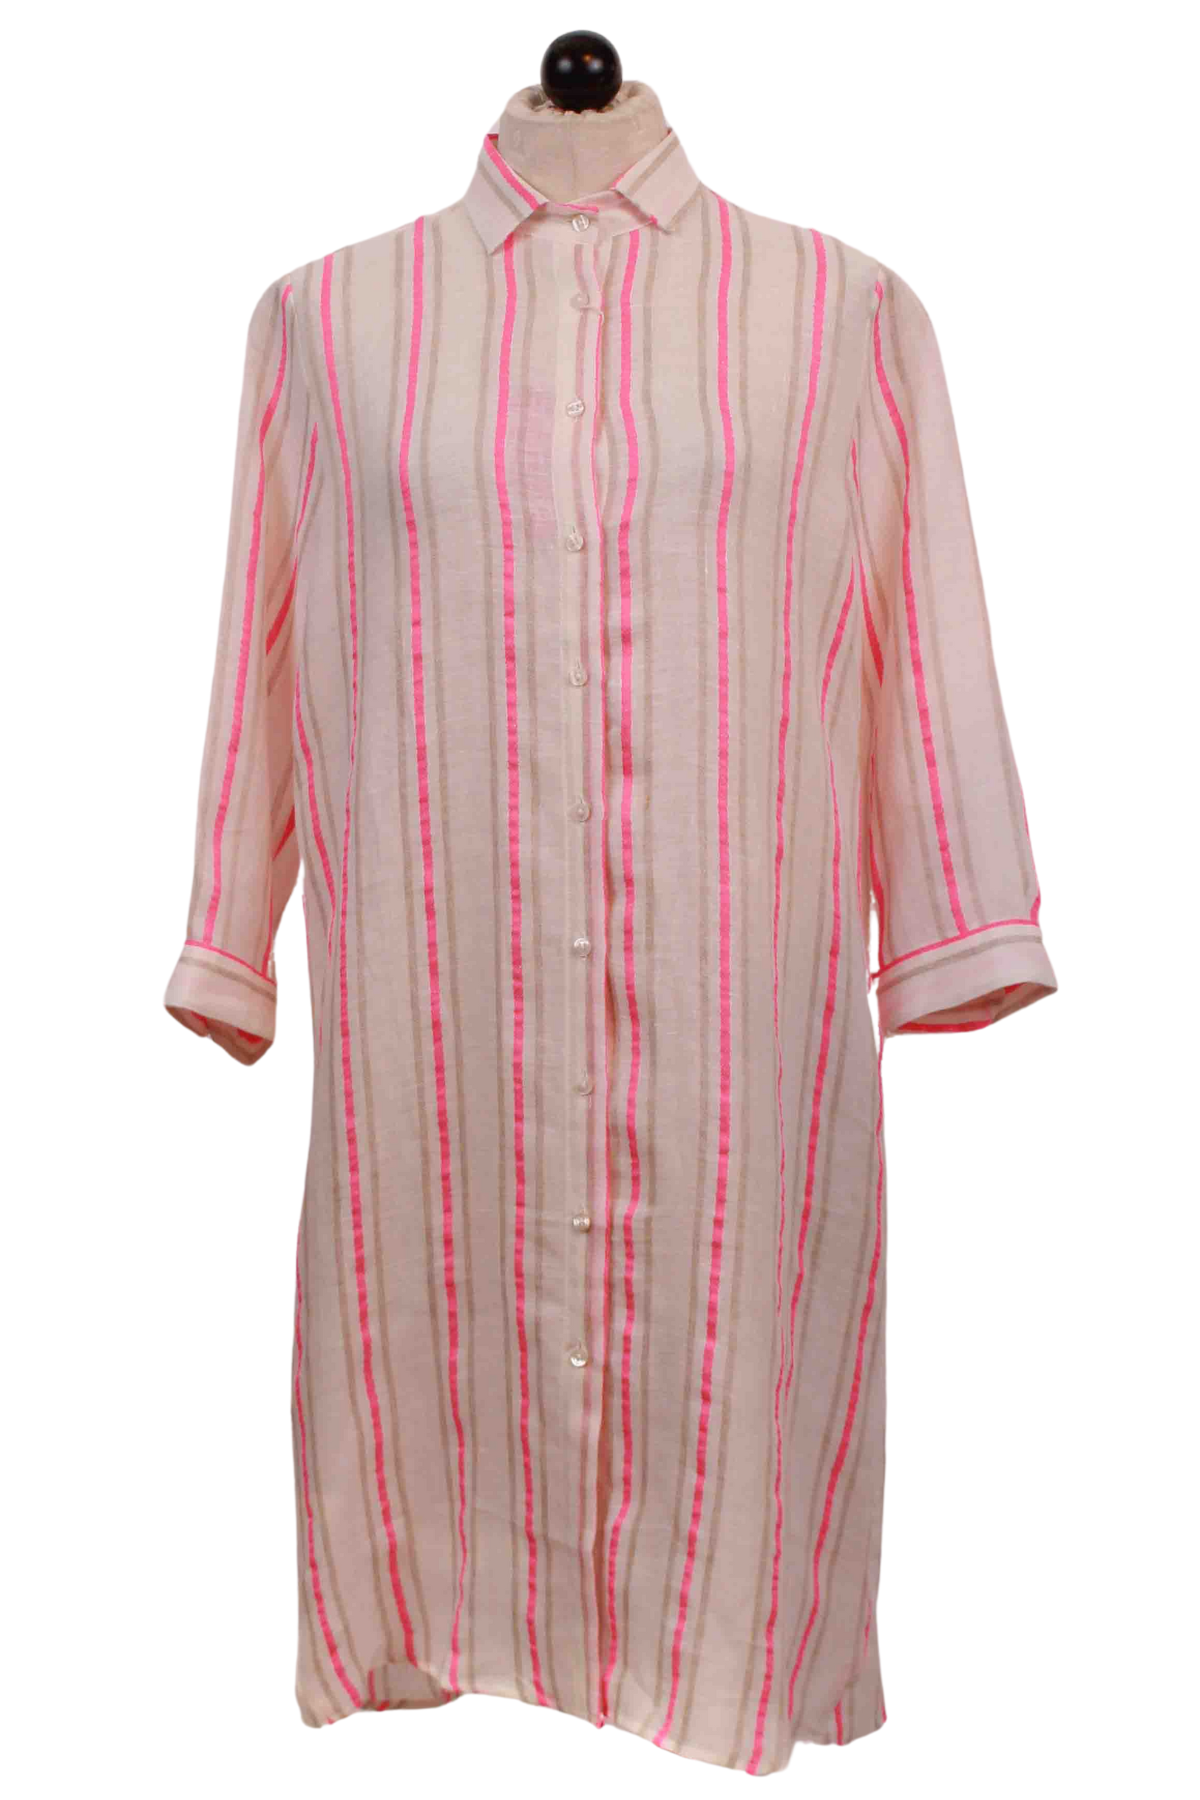 Dover Pink Neon Stripes Dress by Vilagallo